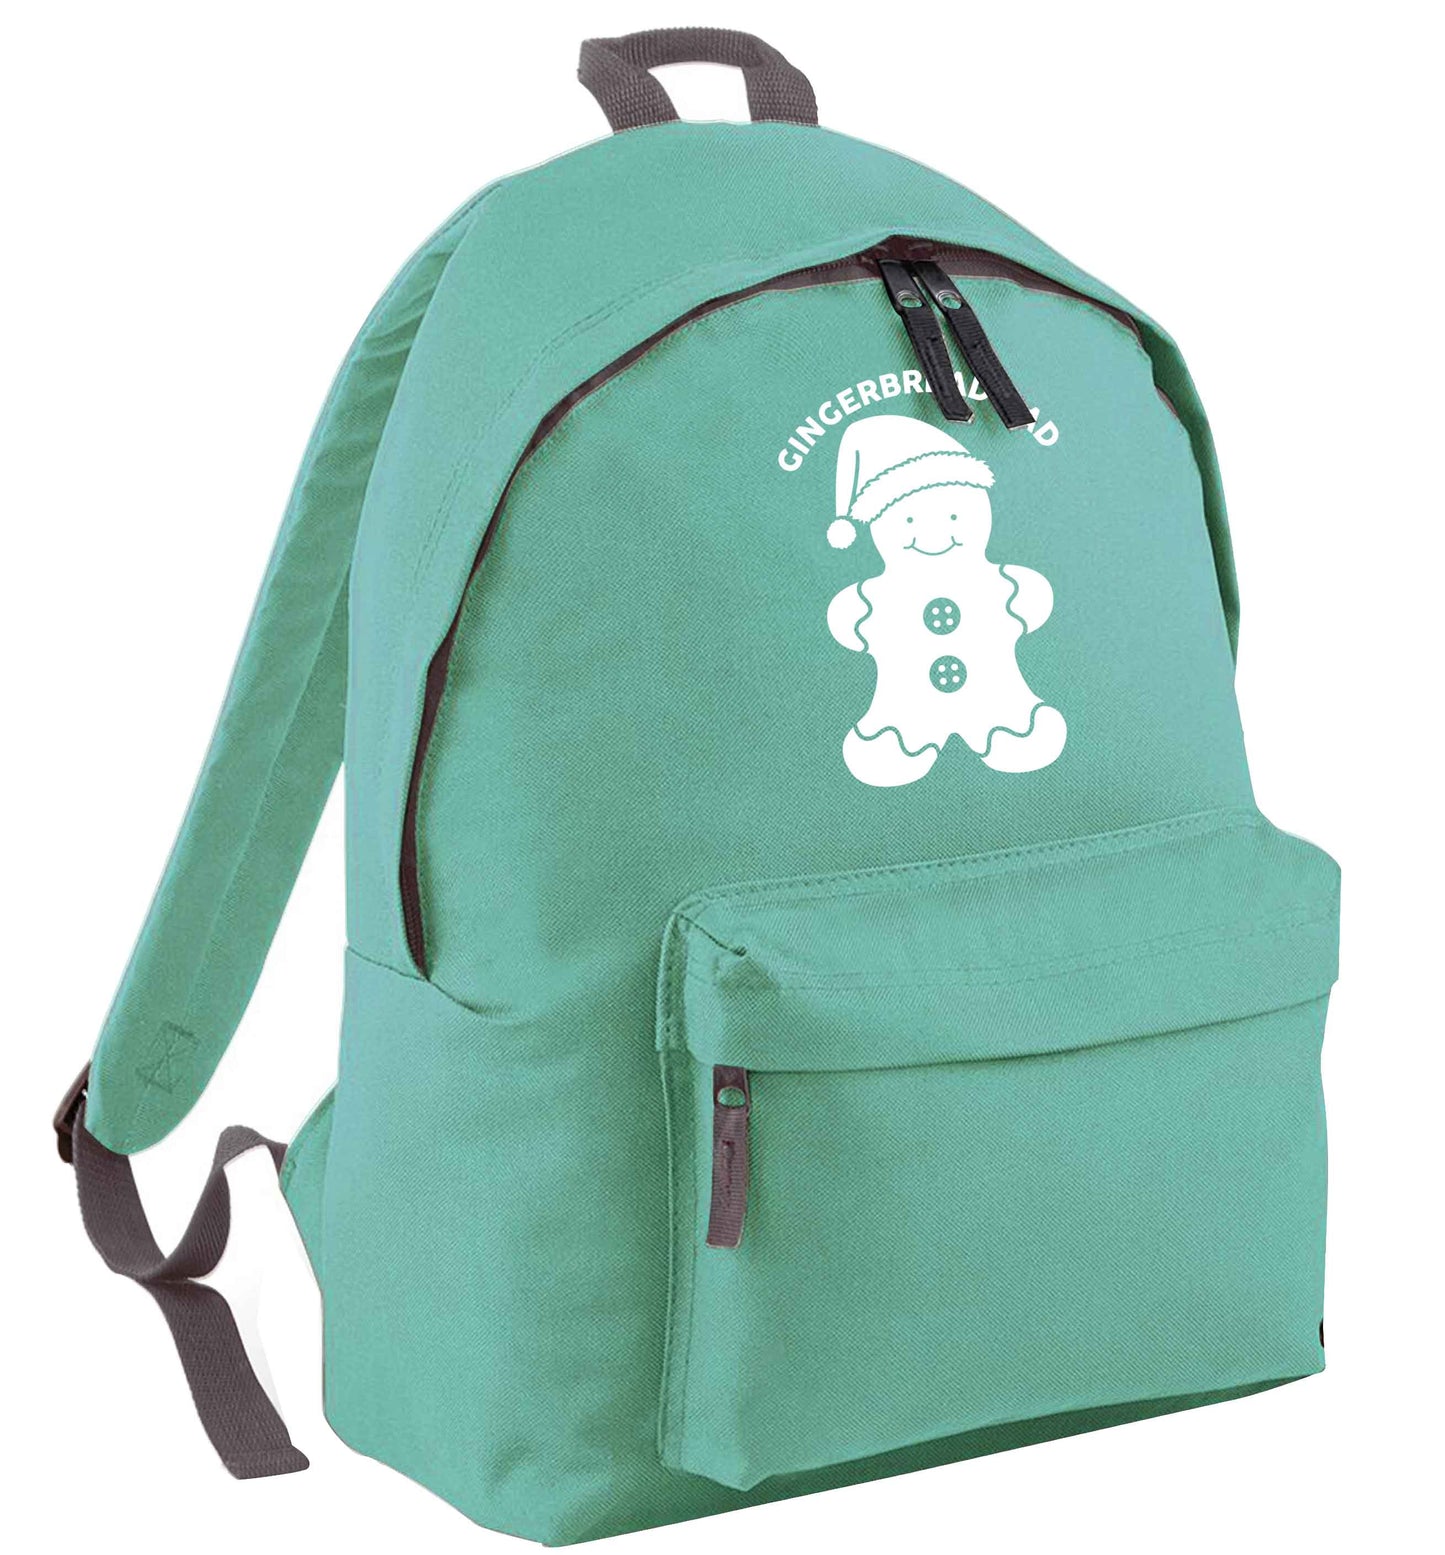 Merry Christmas mint adults backpack